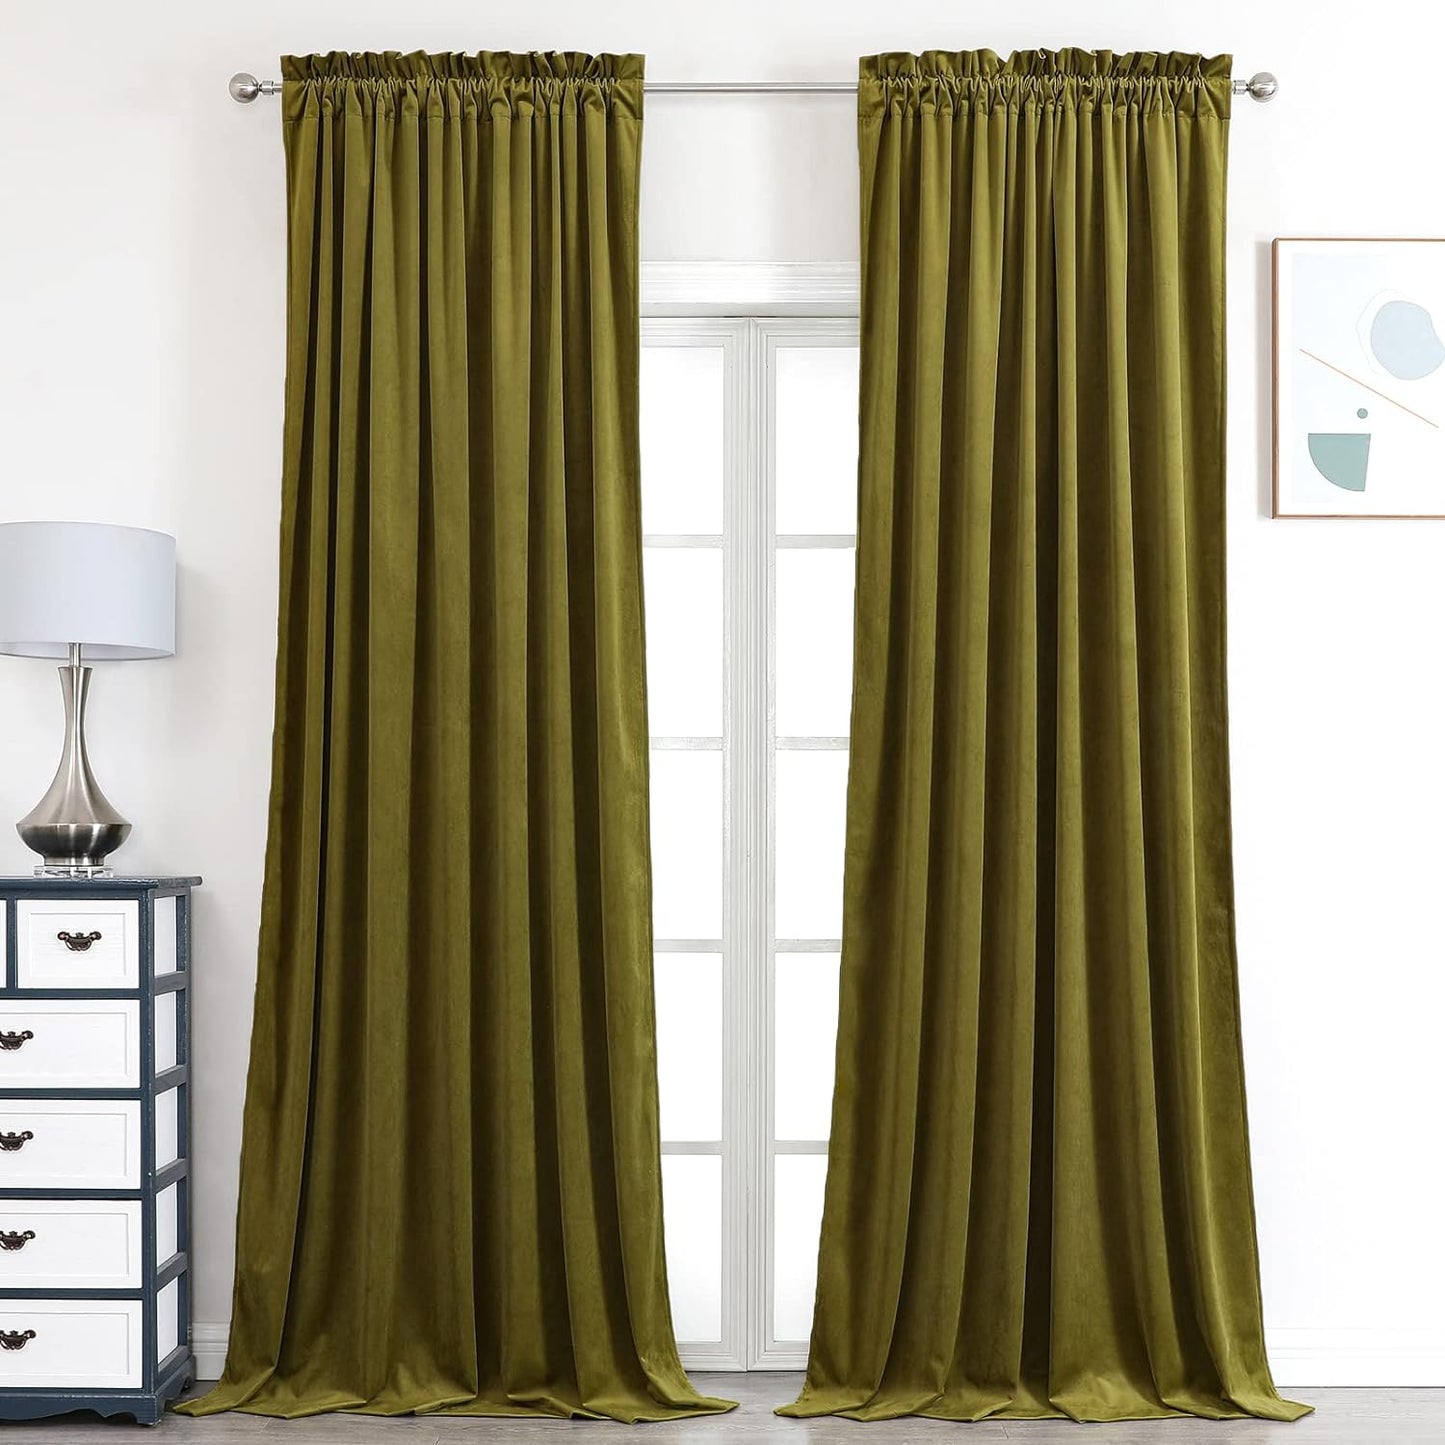 Benedeco Green Velvet Curtains for Bedroom Window, Super Soft Luxury Drapes, Room Darkening Thermal Insulated Rod Pocket Curtain for Living Room, W52 by L84 Inches, 2 Panels  Benedeco Olive Green W52 * L63 | 2 Panels 